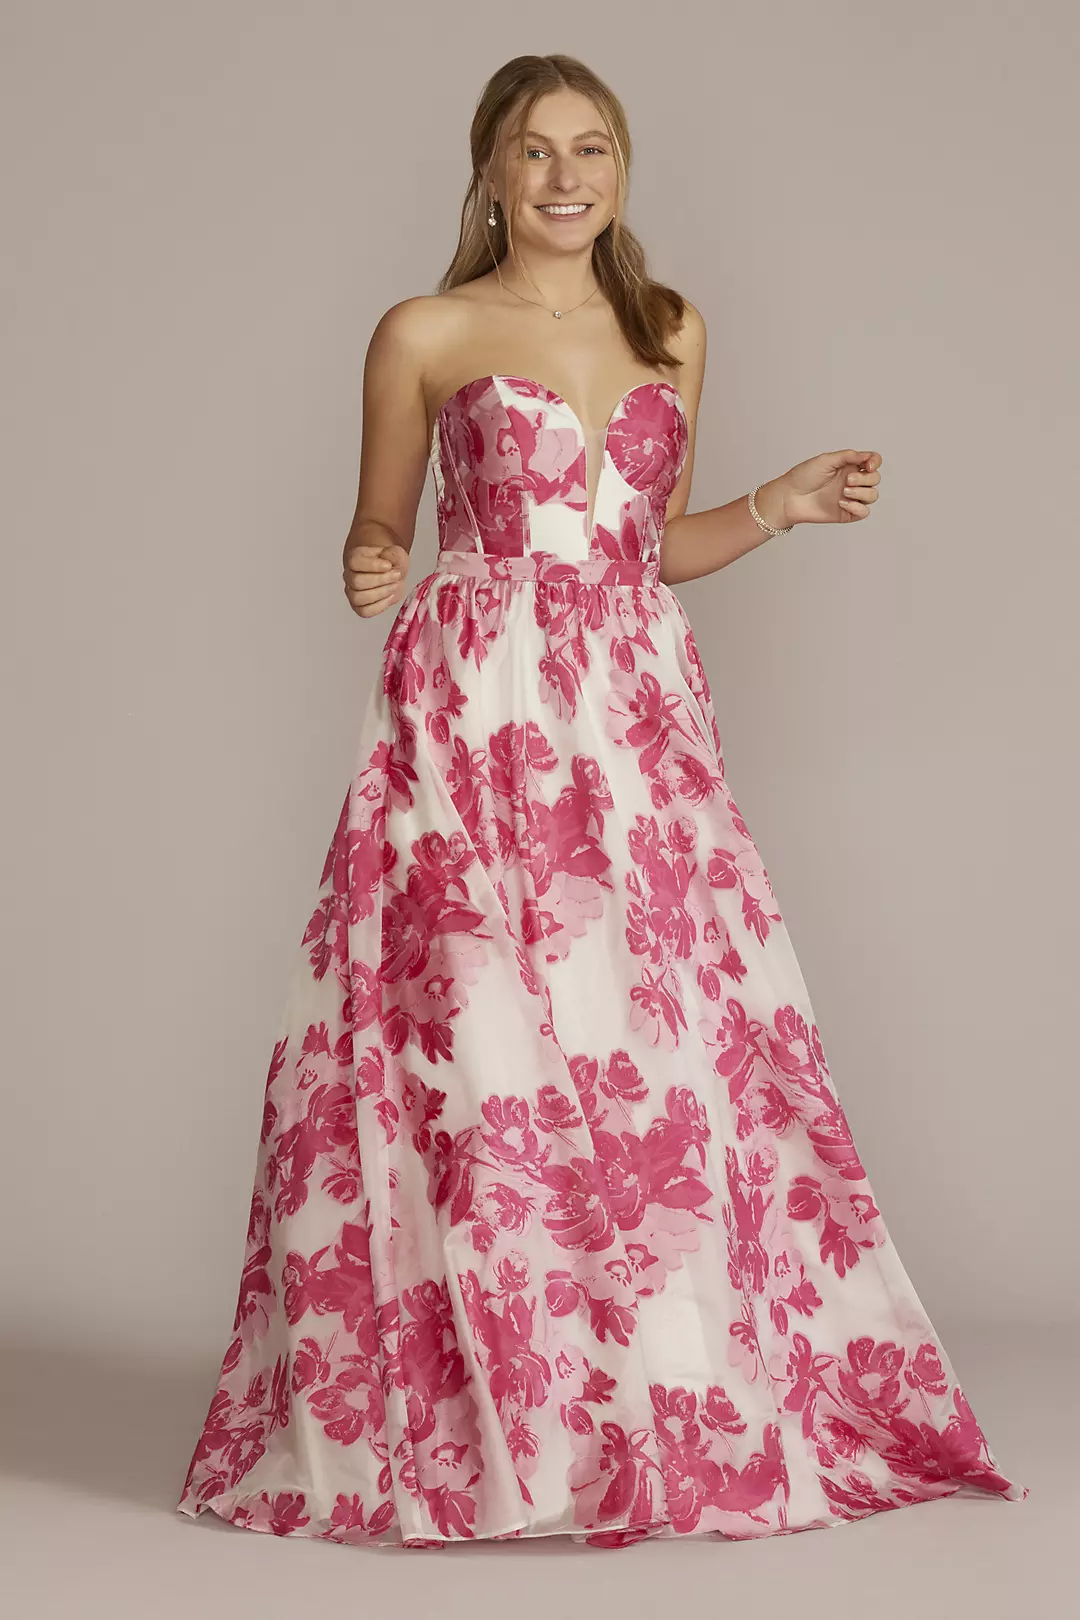 Floral Patterned Strapless Corset Ball Gown Image